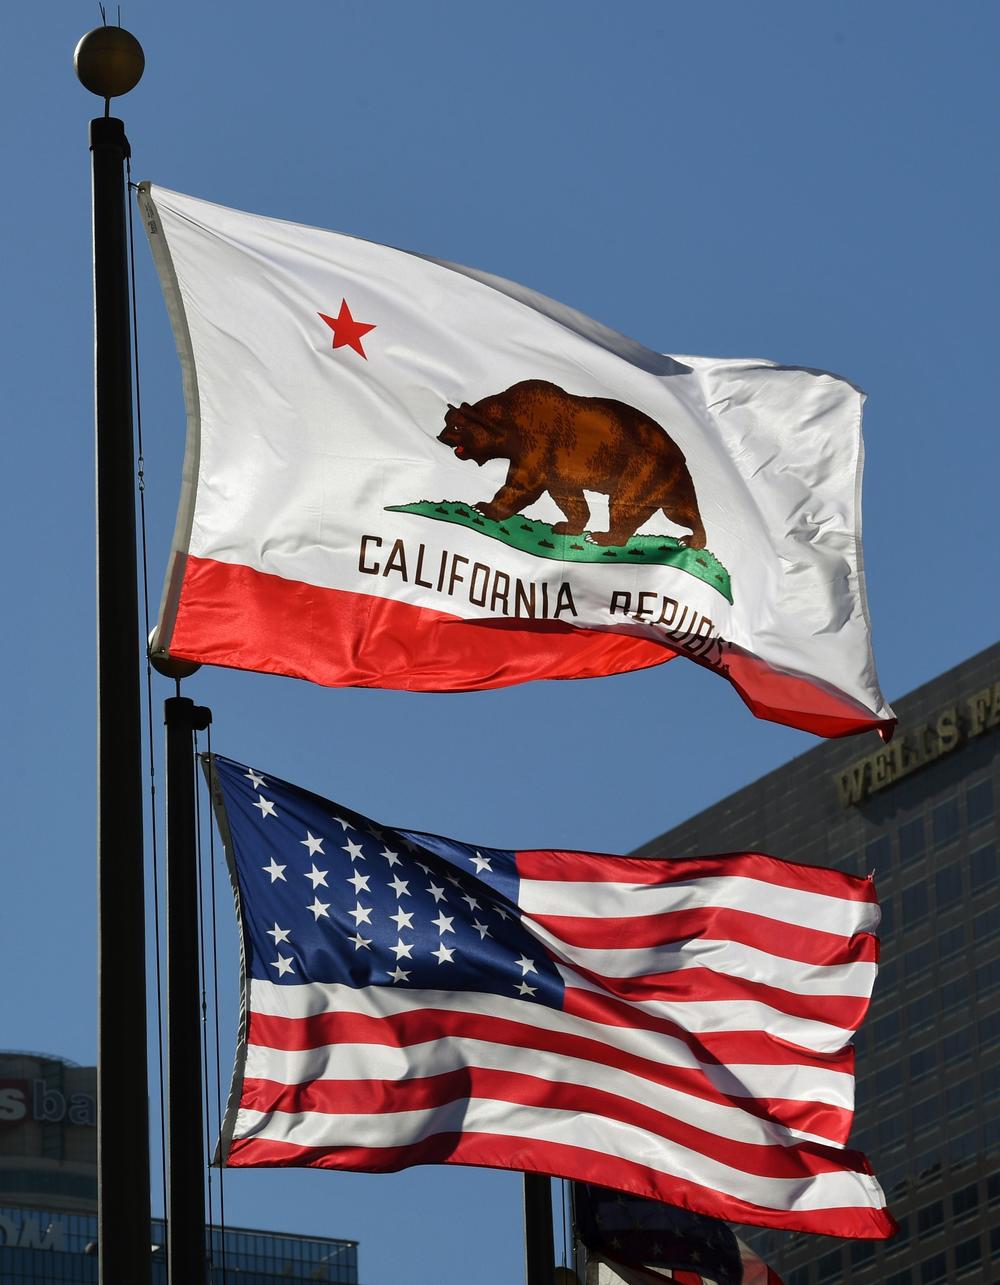 California's state flag flies in Los Angeles in January 2017.